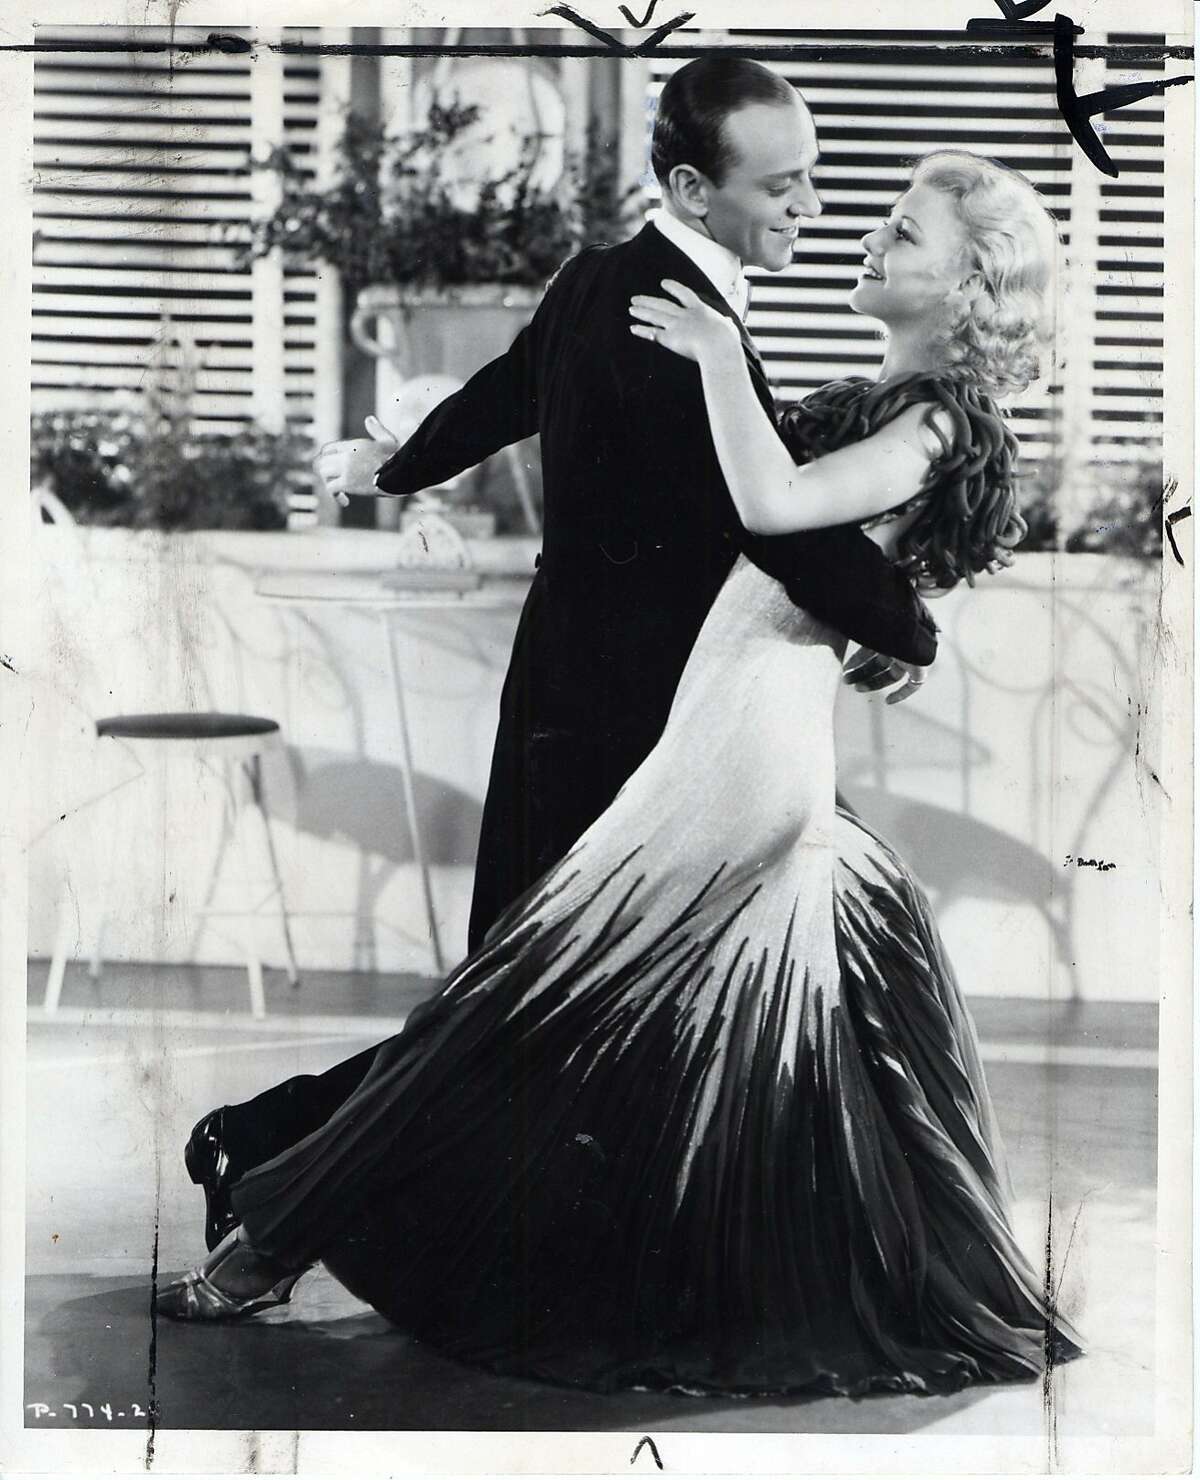 Fred Astair and Ginger Rogers in "The Gay Divorcee," which plays June 11-13 at Stanford Theatre. 1934 on 9/29/04 in . / HO Ran on: 03-30-2007 Ginger Rogers, a 1984 festival honoree, and Fred Astaire in The Gay Divorcee (1934). Ran on: 11-14-2010 Fred Astaire and Ginger Rogers in The Gay Divorcee: Good New Year's Eve viewing.